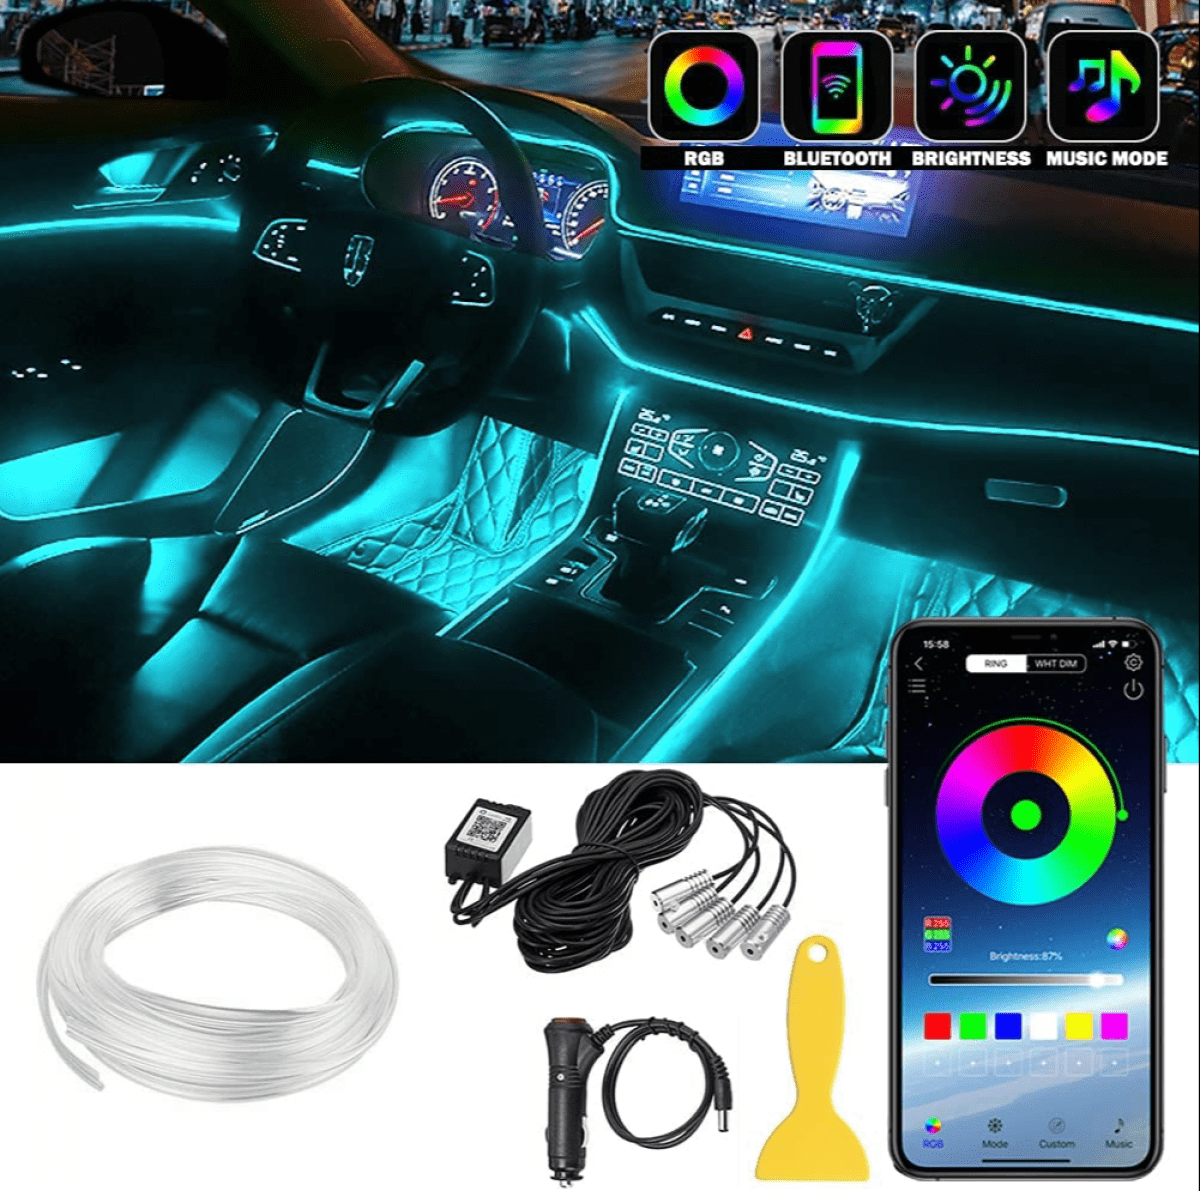  QVEVDACAR Car LED Strip Lights, Multicolor Interior Car Lights,  16 Million Colors 5 in 1 Ambient Lighting Kit with 236 inches Fiber Optic,  Function and Wireless APP Control (5 in 1 APP) : Automotive